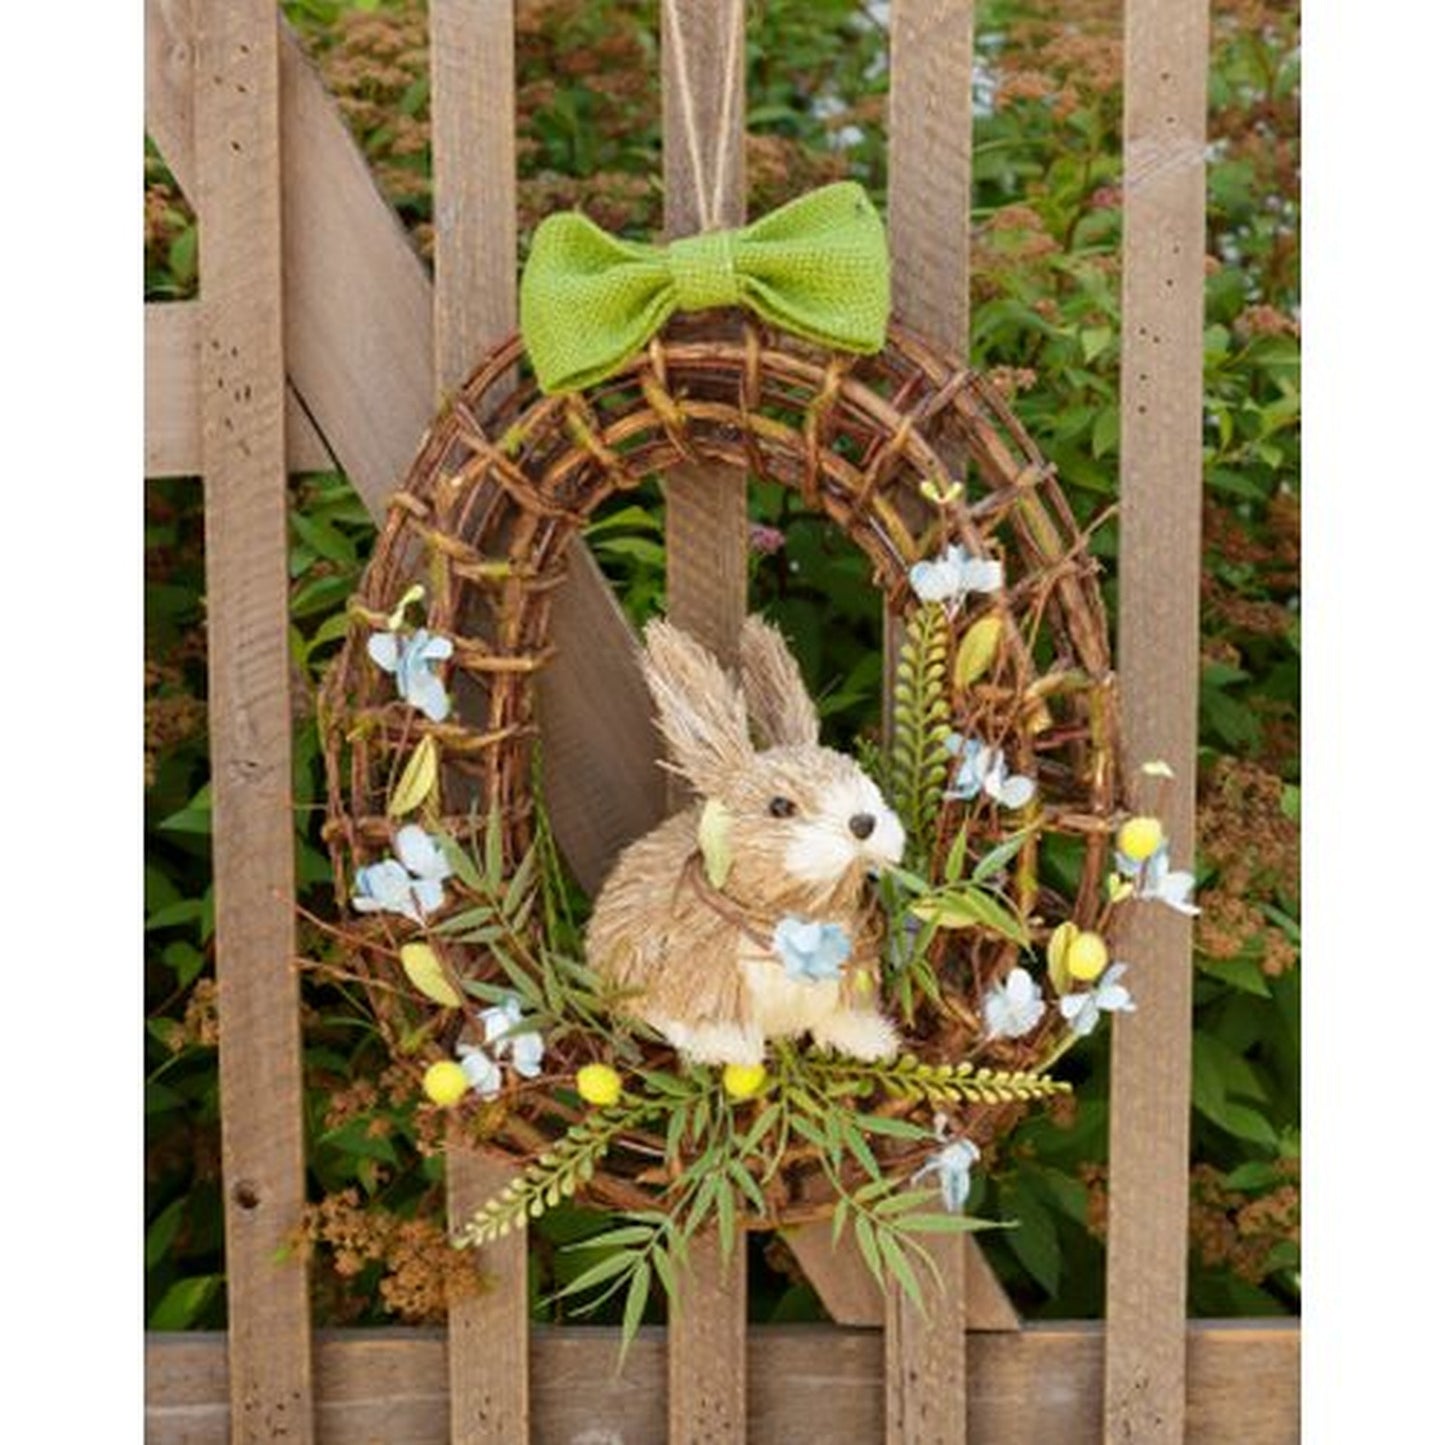 Your Heart's Delight Springtime Bunnies  Relaxing In A Wreath